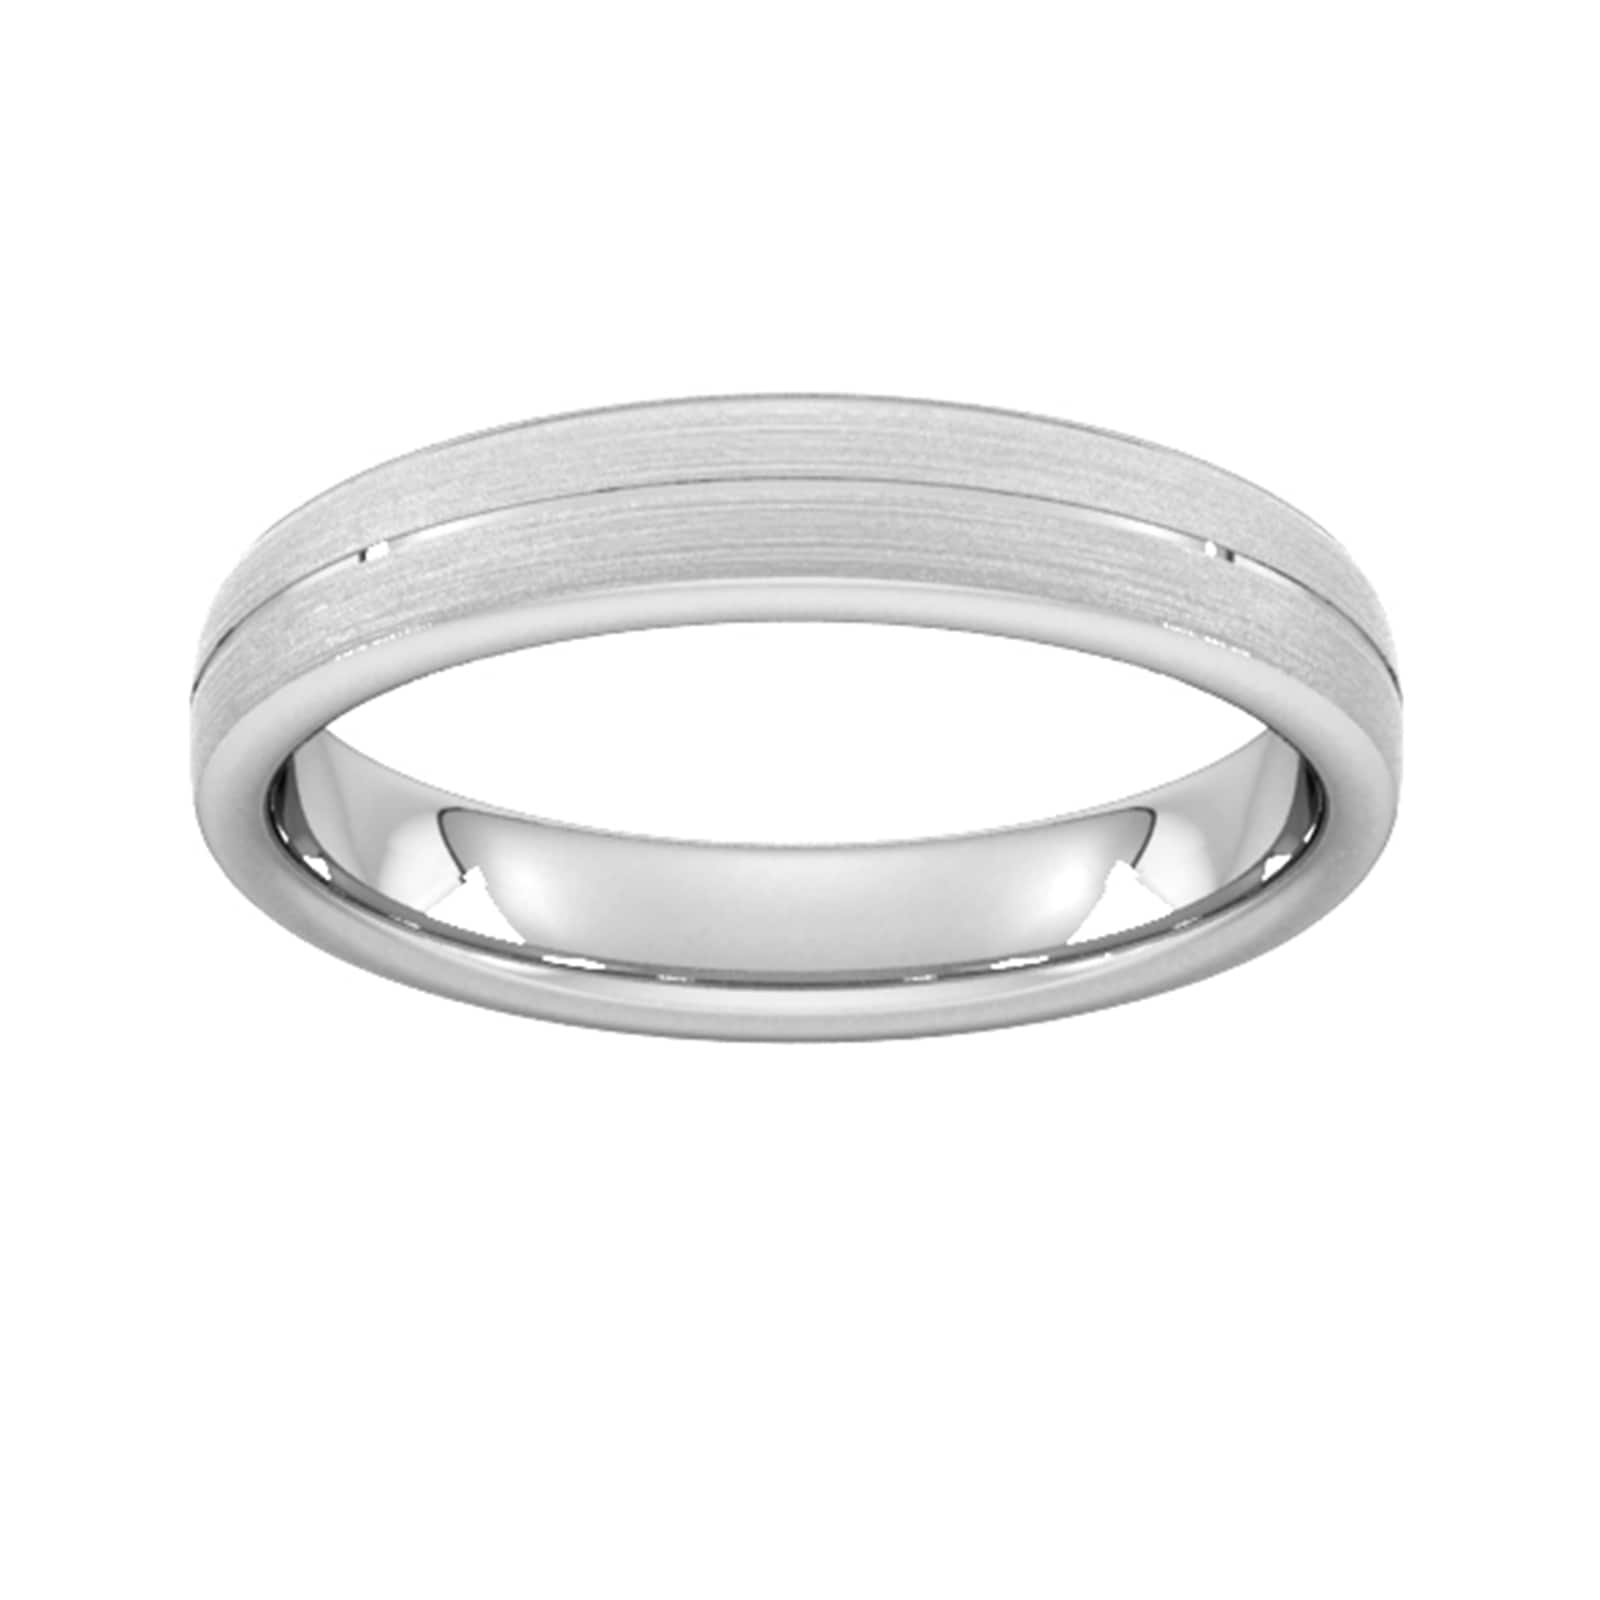 4mm Slight Court Standard Centre Groove With Chamfered Edge Wedding Ring In 9 Carat White Gold - Ring Size V